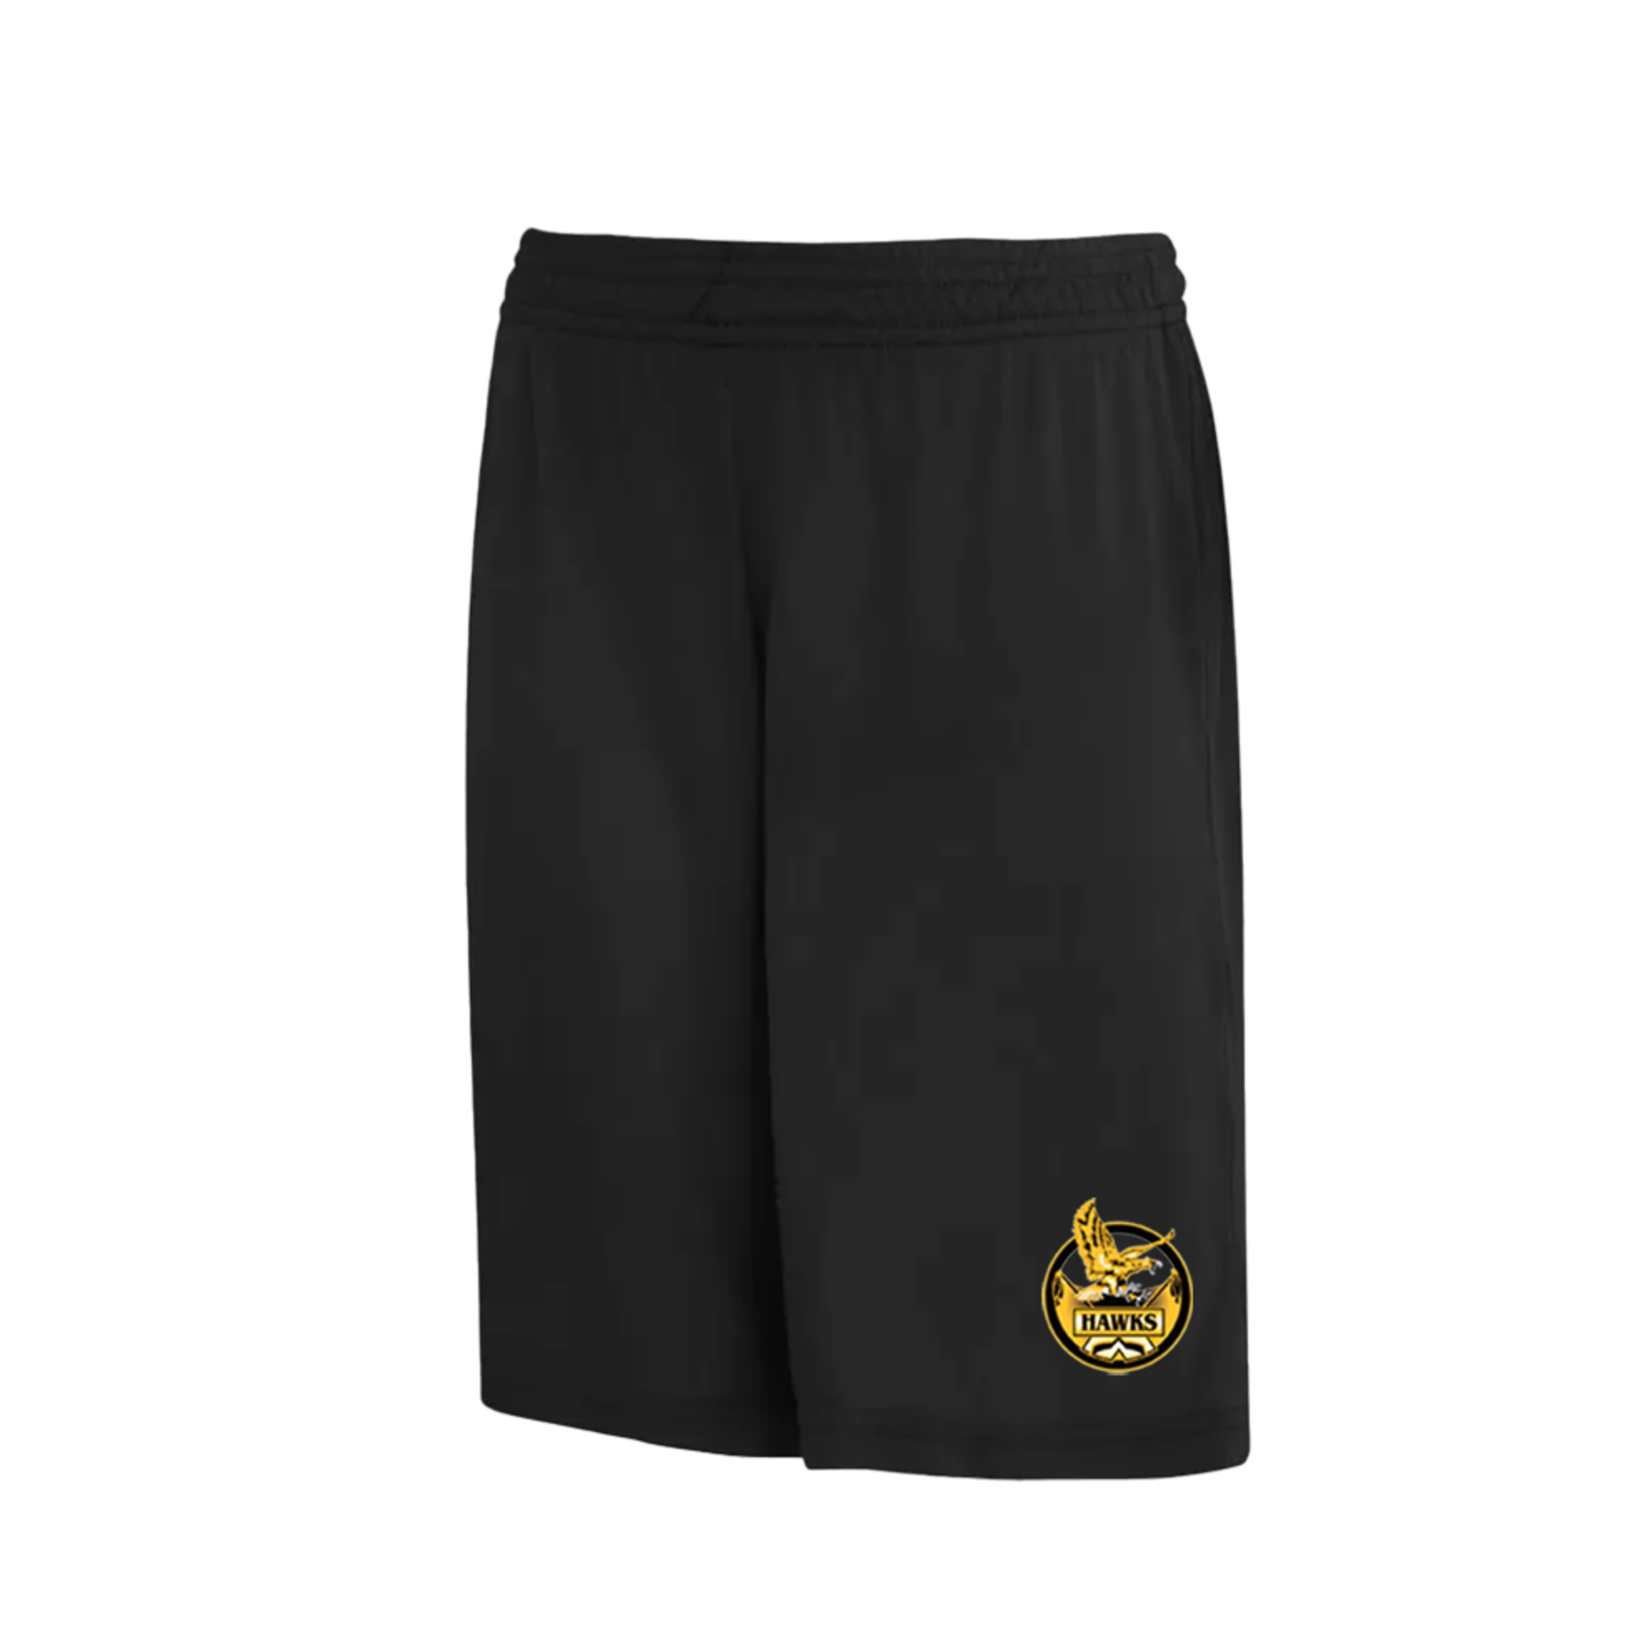 Russell Hawks Dri-Power Pocketed Shorts